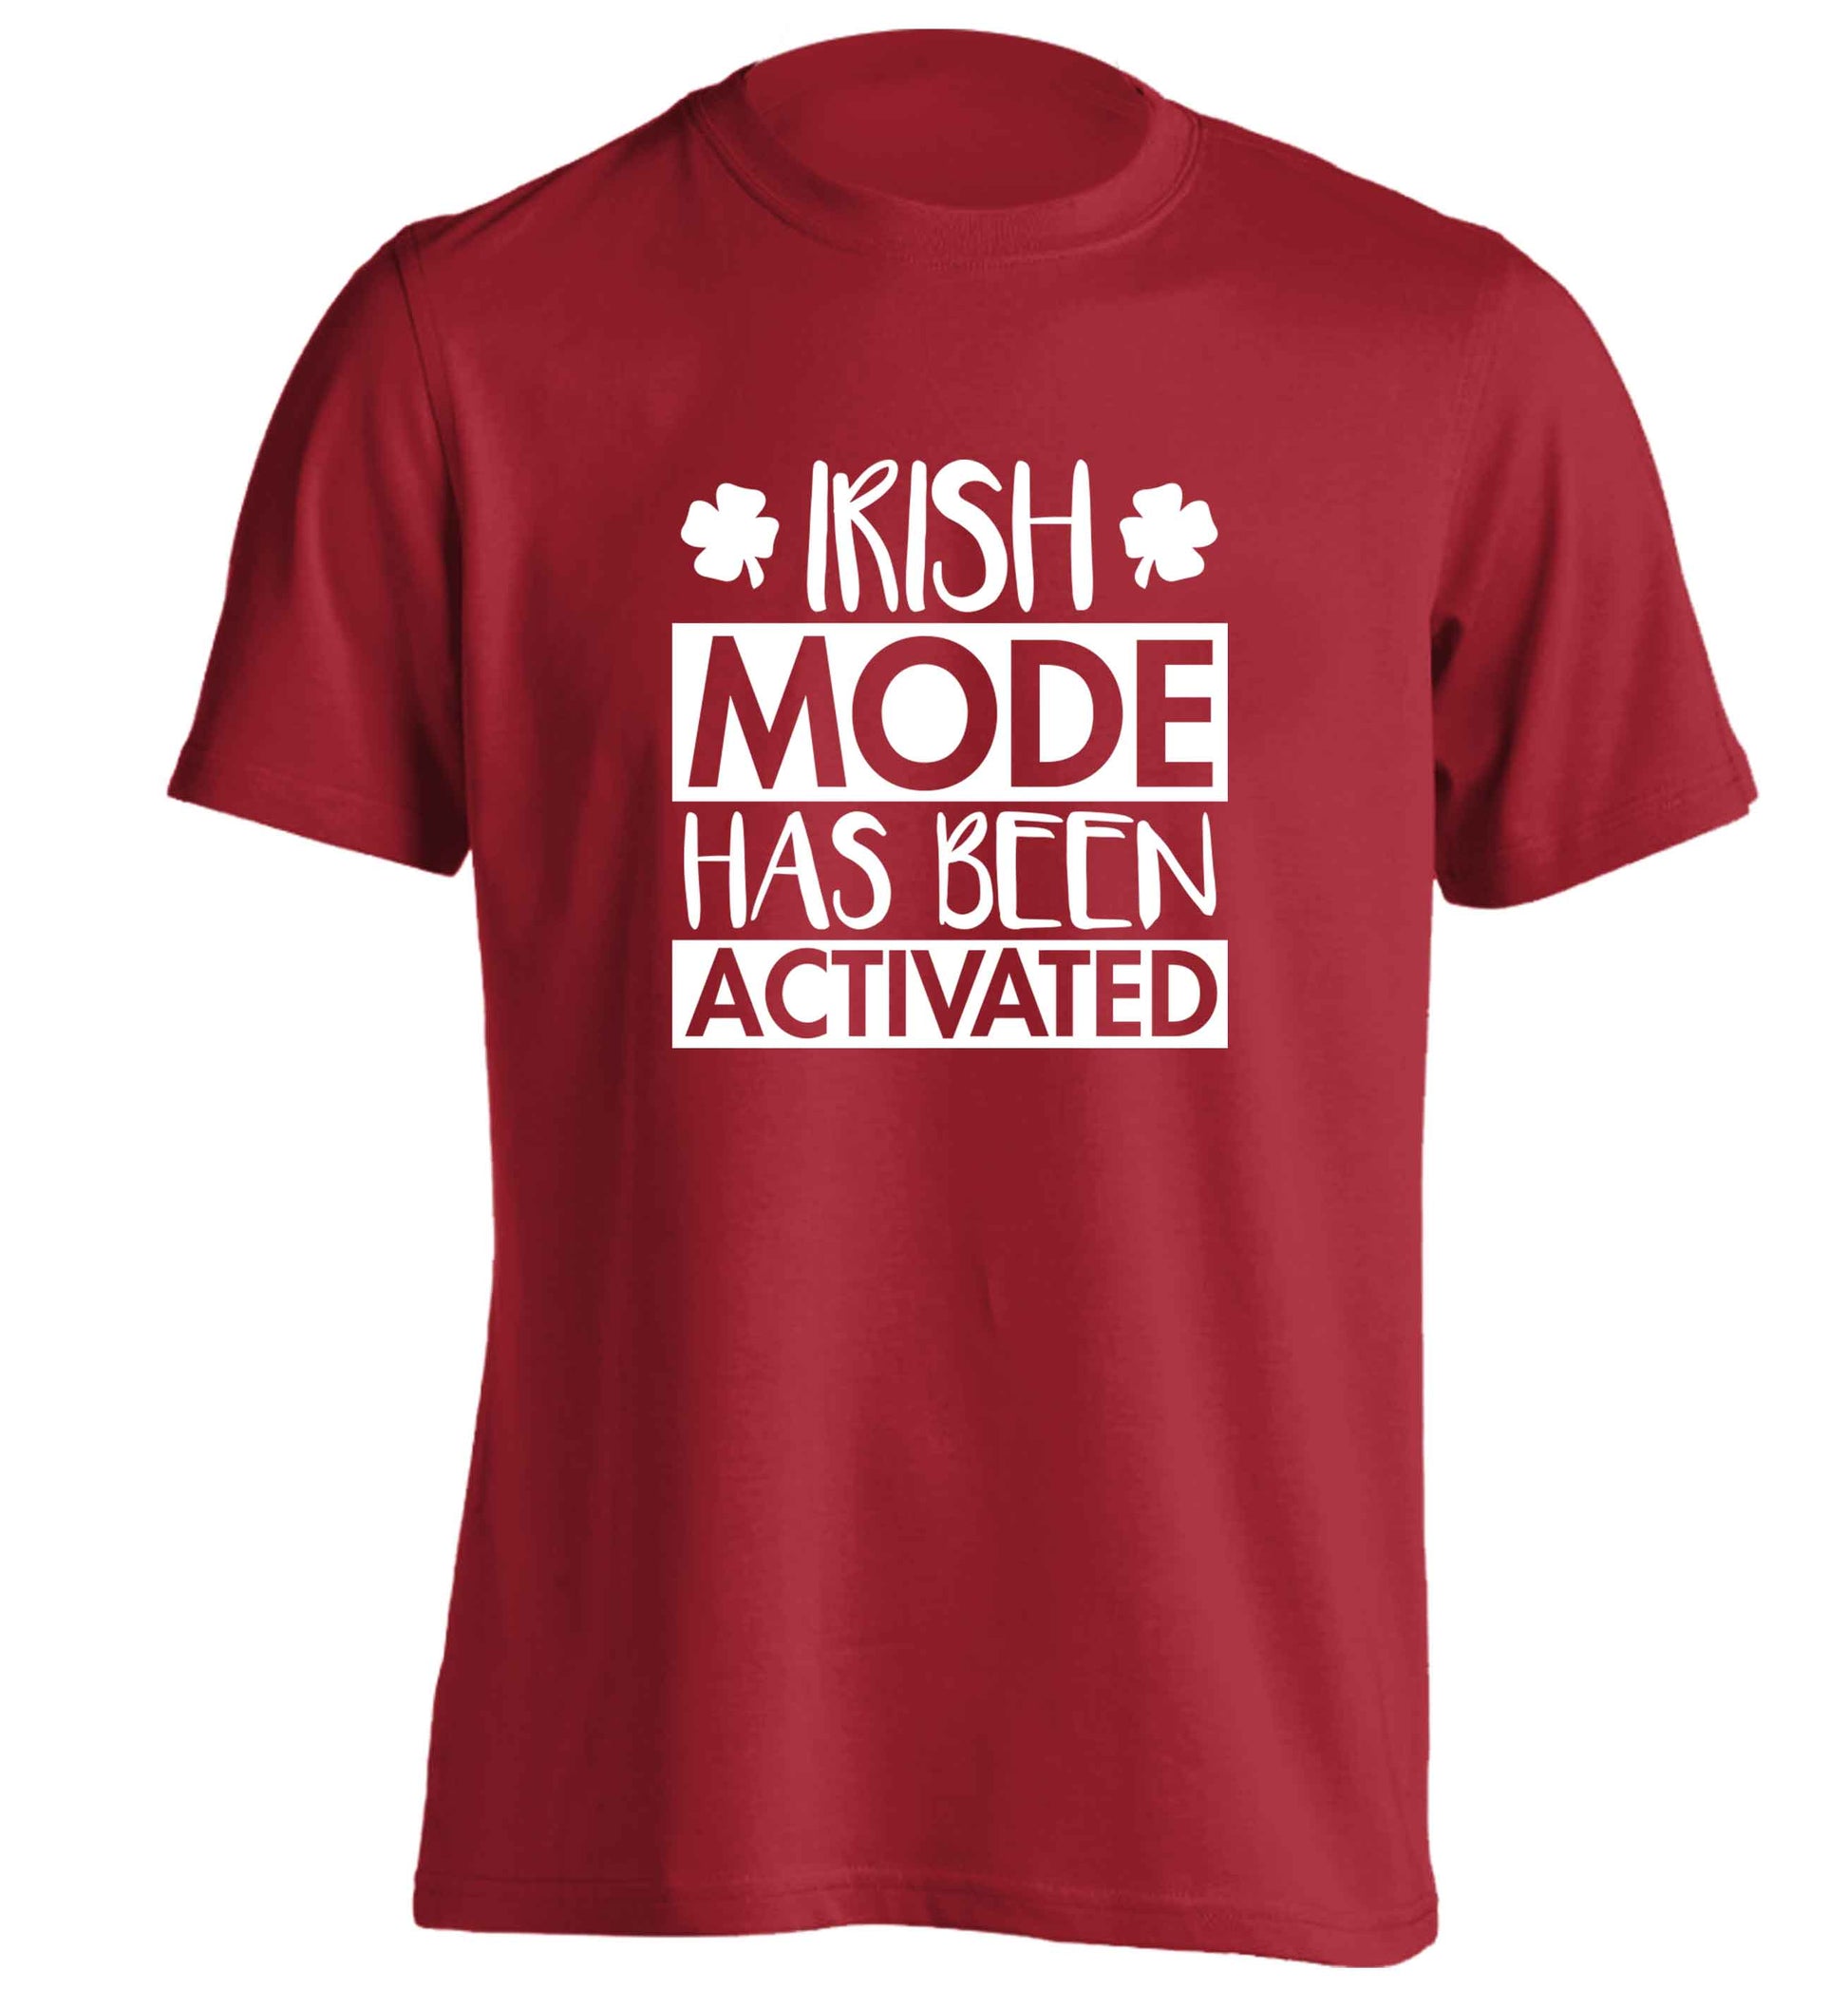 Irish mode has been activated adults unisex red Tshirt 2XL